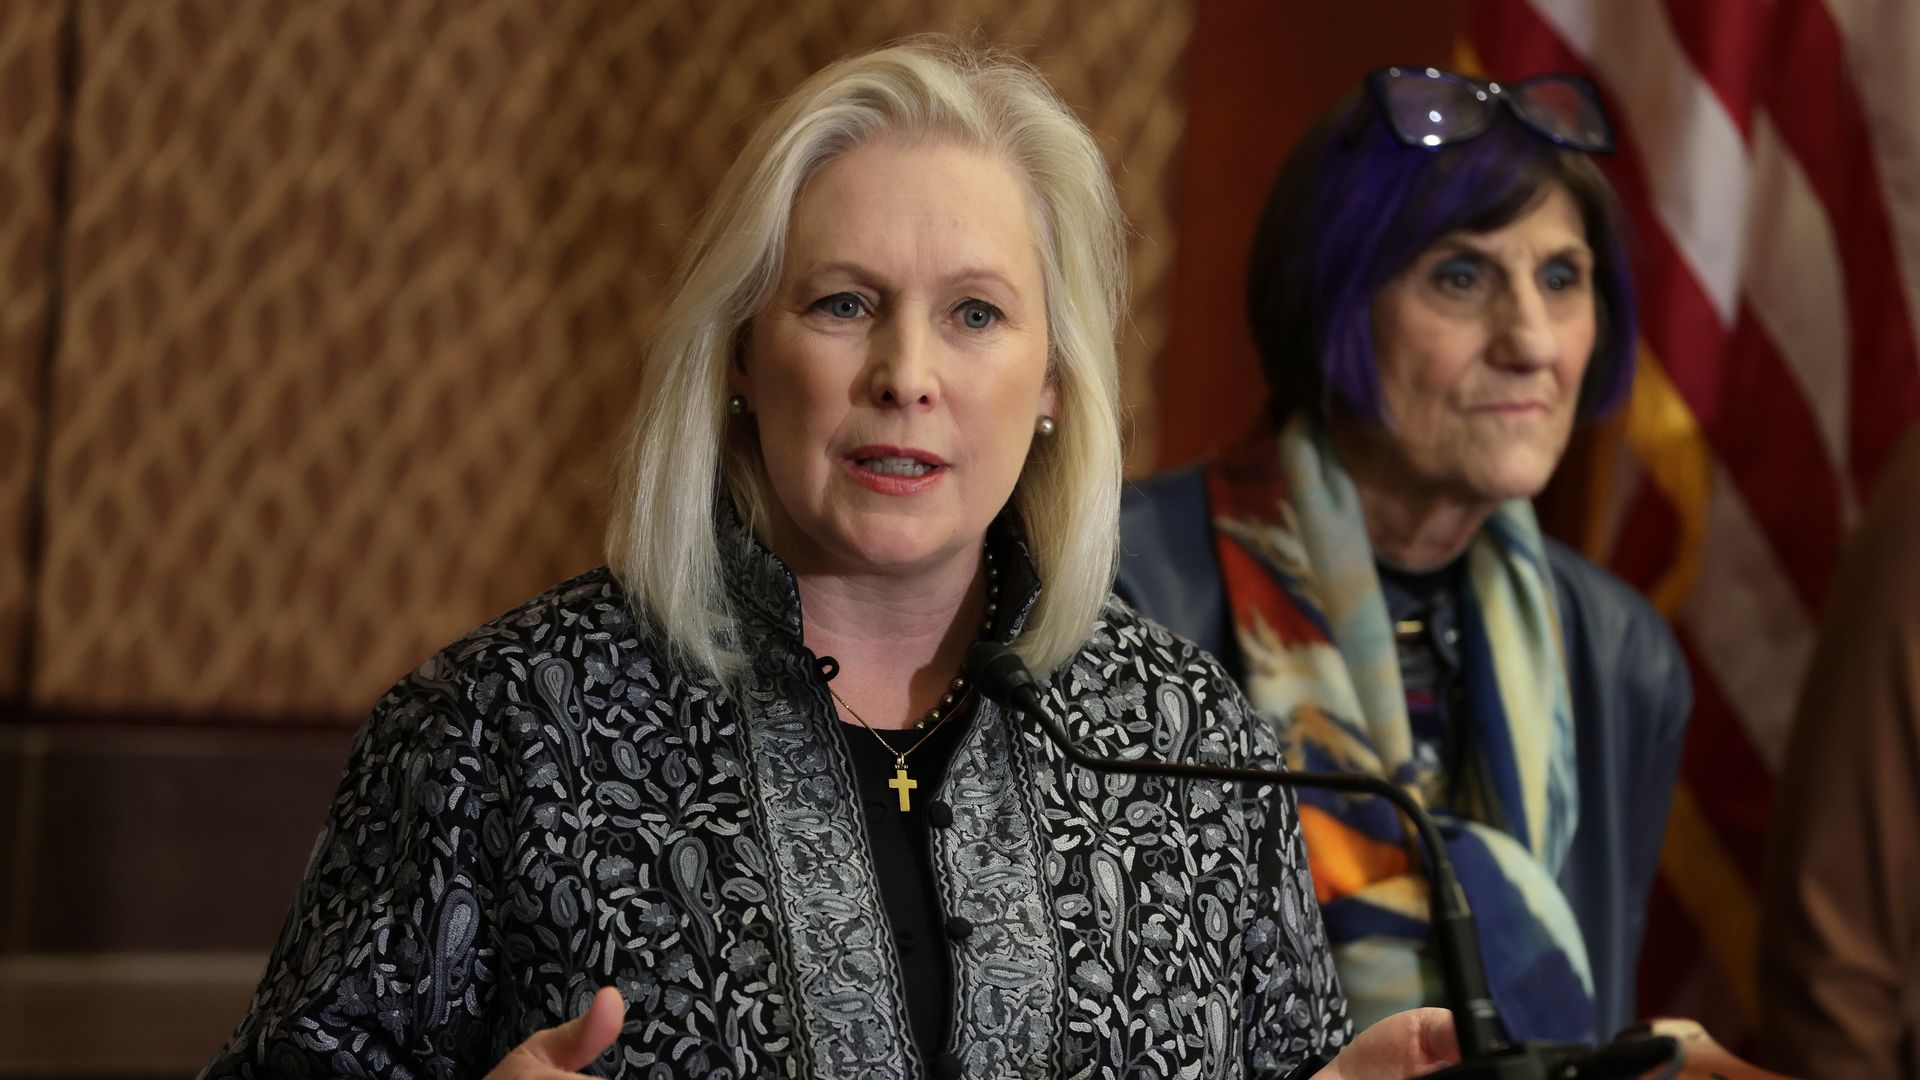  U.S. Sen. Kirsten Gillibrand (D-NY) speaks as Rep. Rosa DeLauro (D-CT) listens during a news conference on the Family and Medical Leave Act at the U.S. Capitol on February 1, 2023